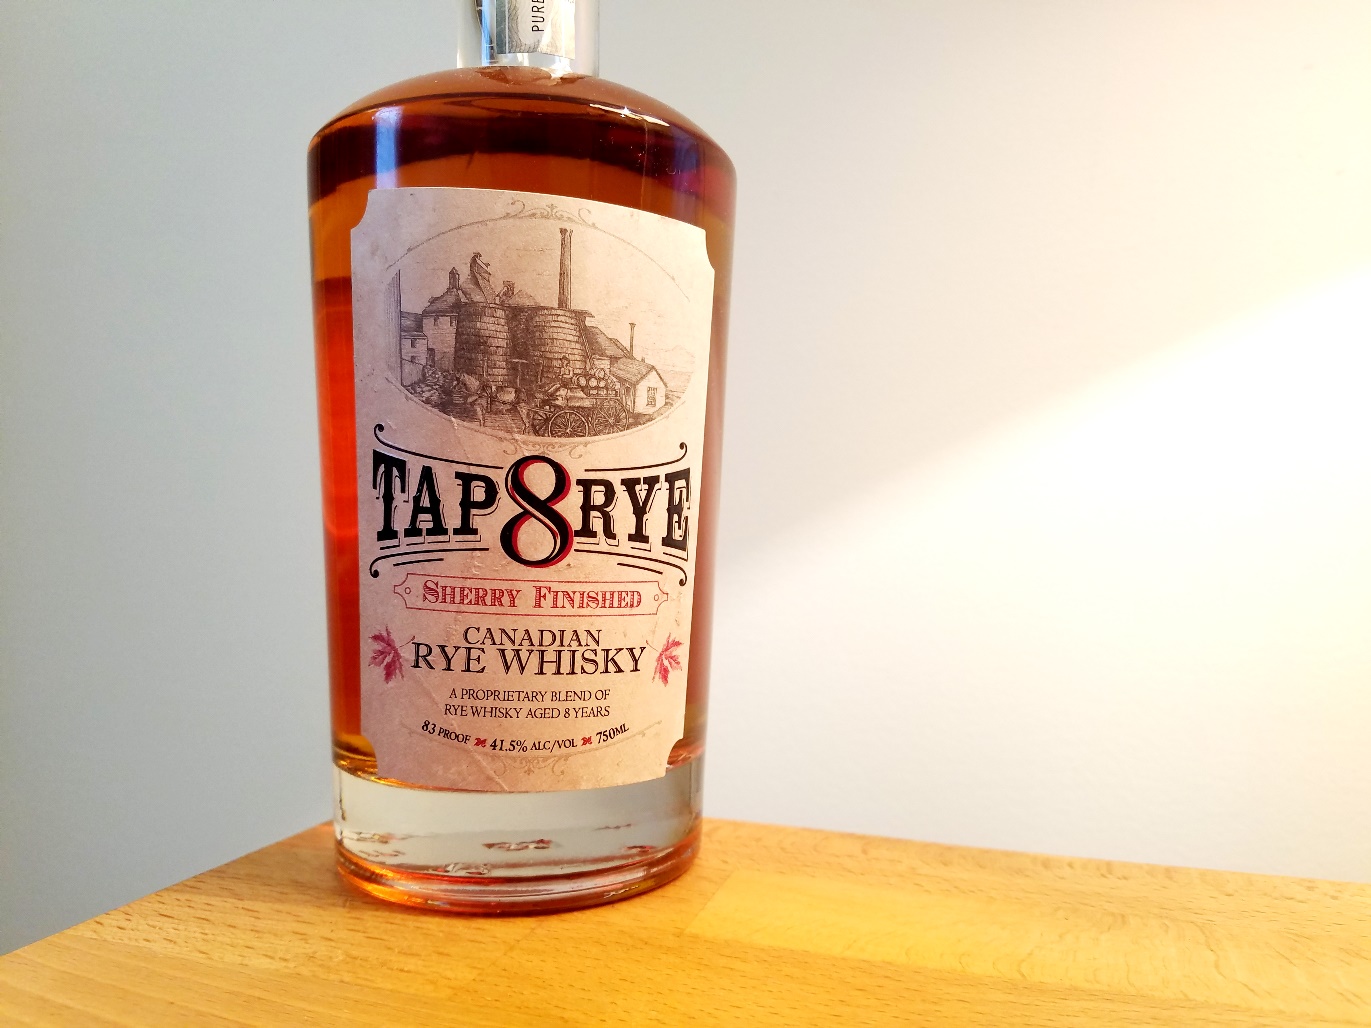 Tap Rye, 8 Years Sherry Finished Canadian Rye Whisky, Canada, Wine Casual